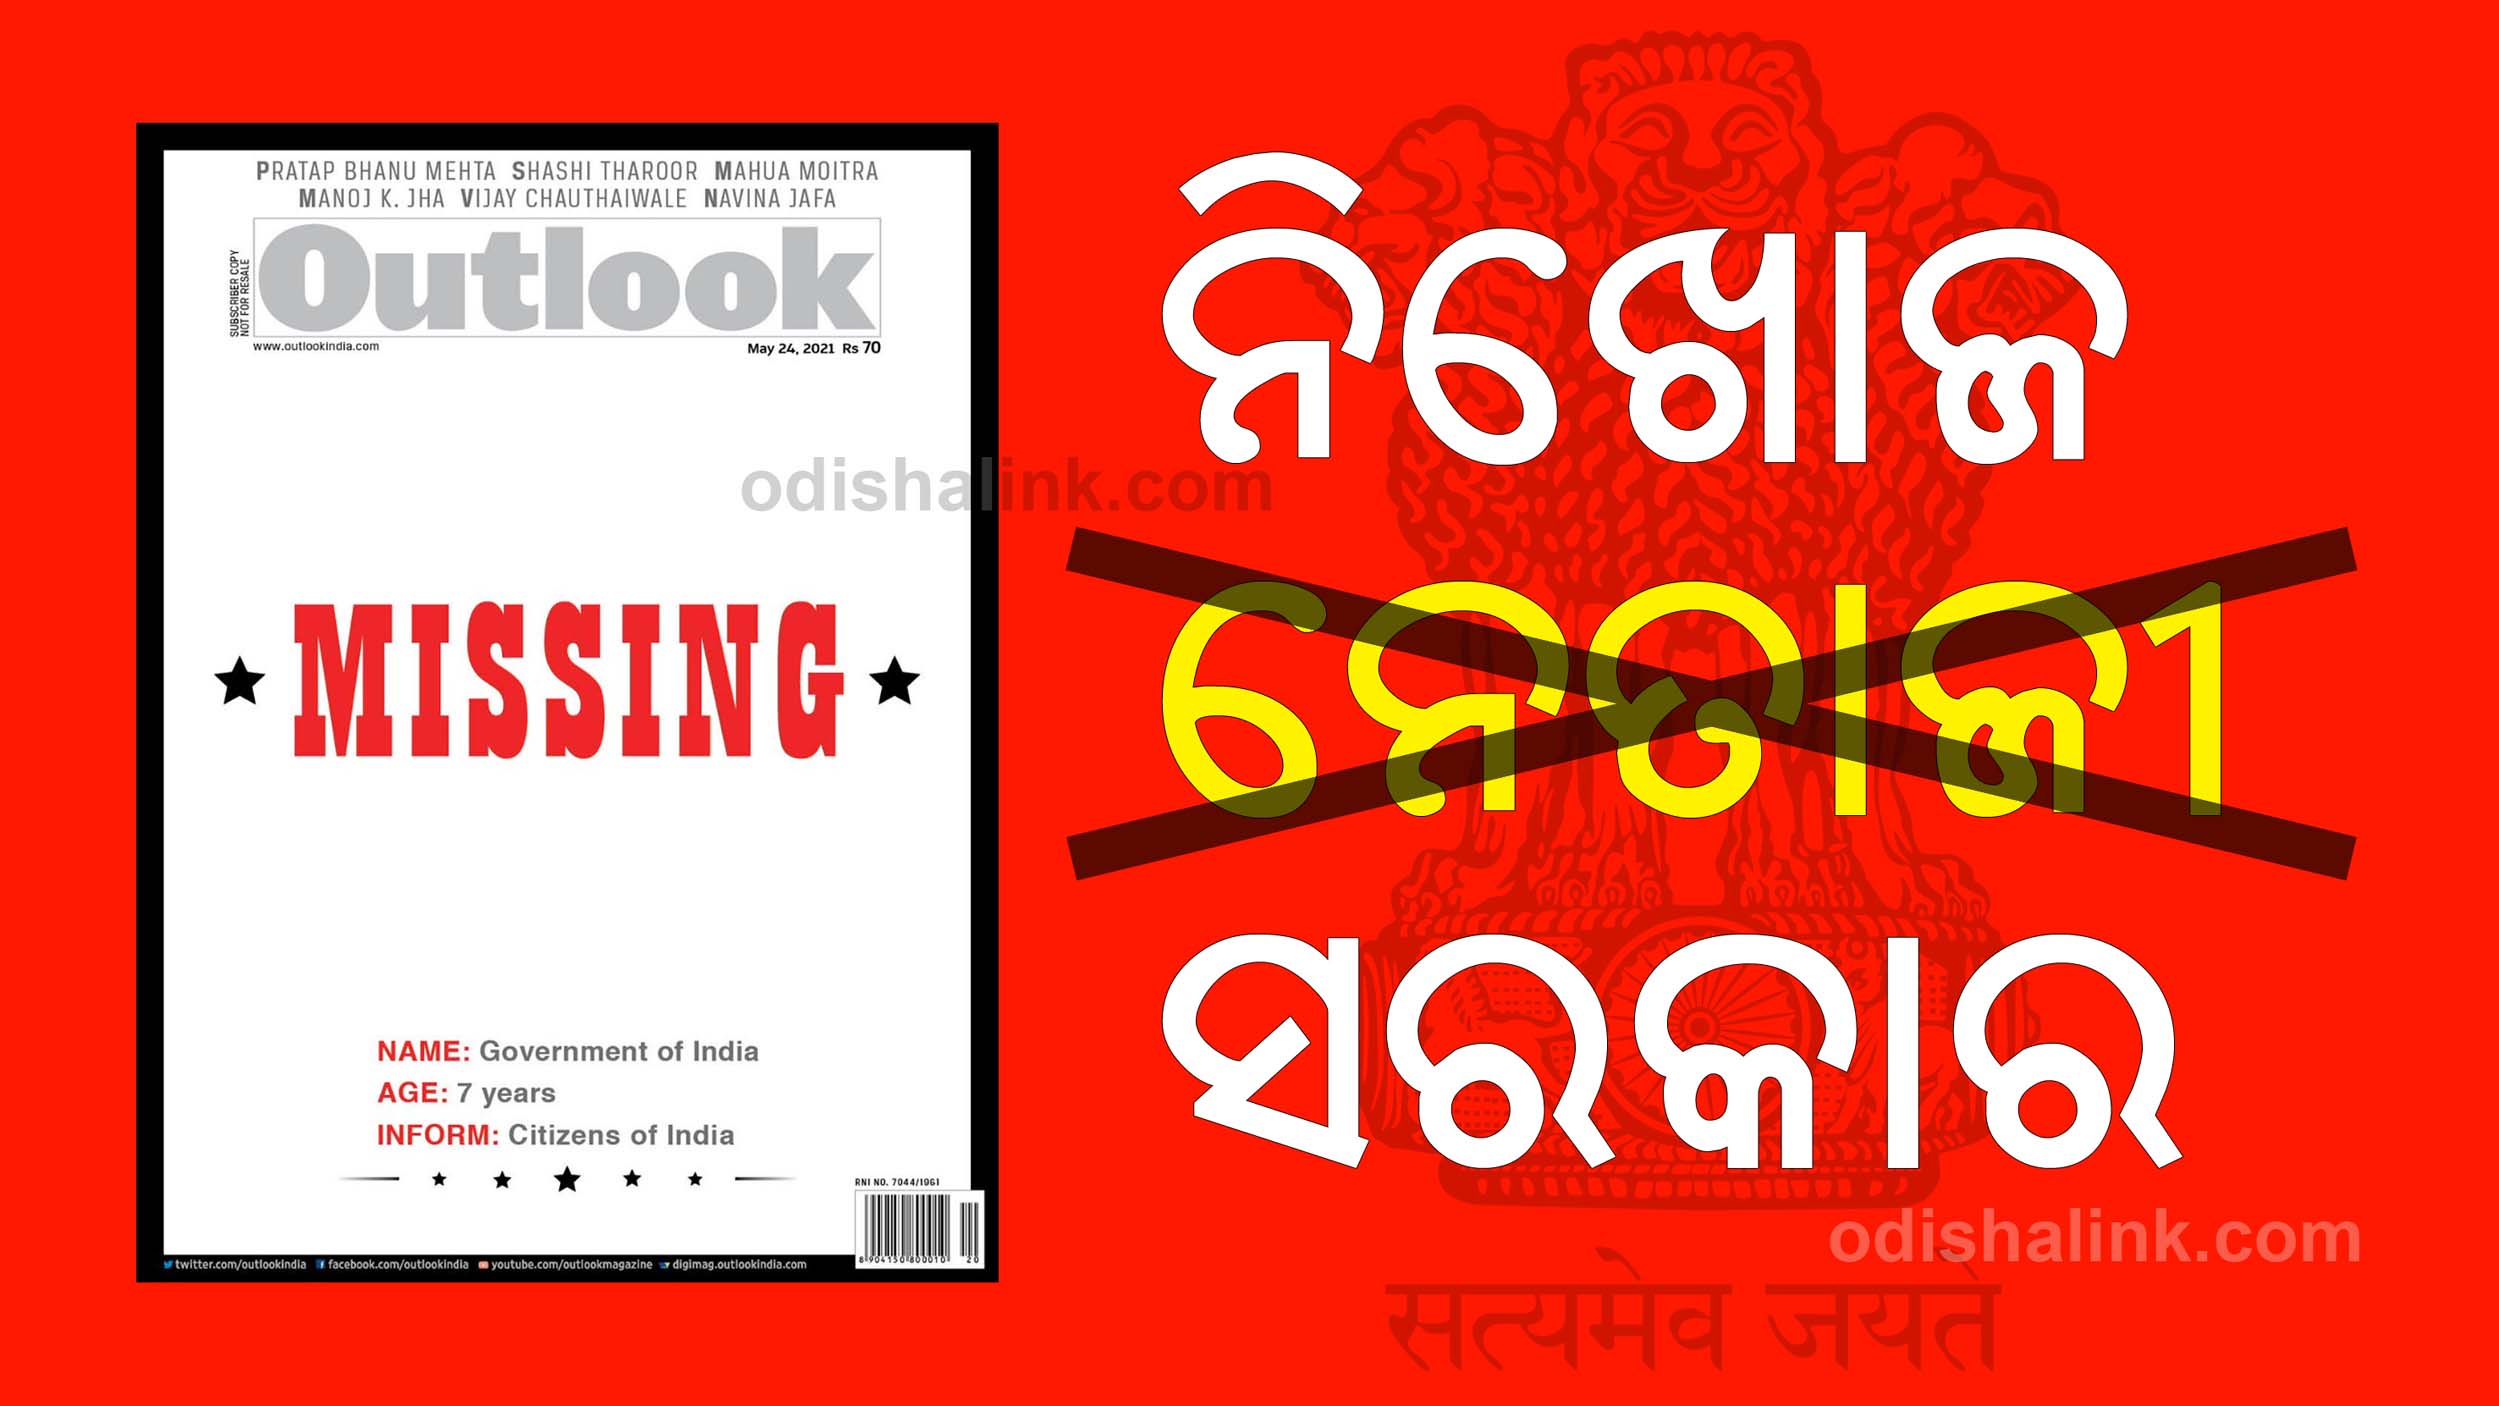 Indian Government missing outlook cover page storms social media 1